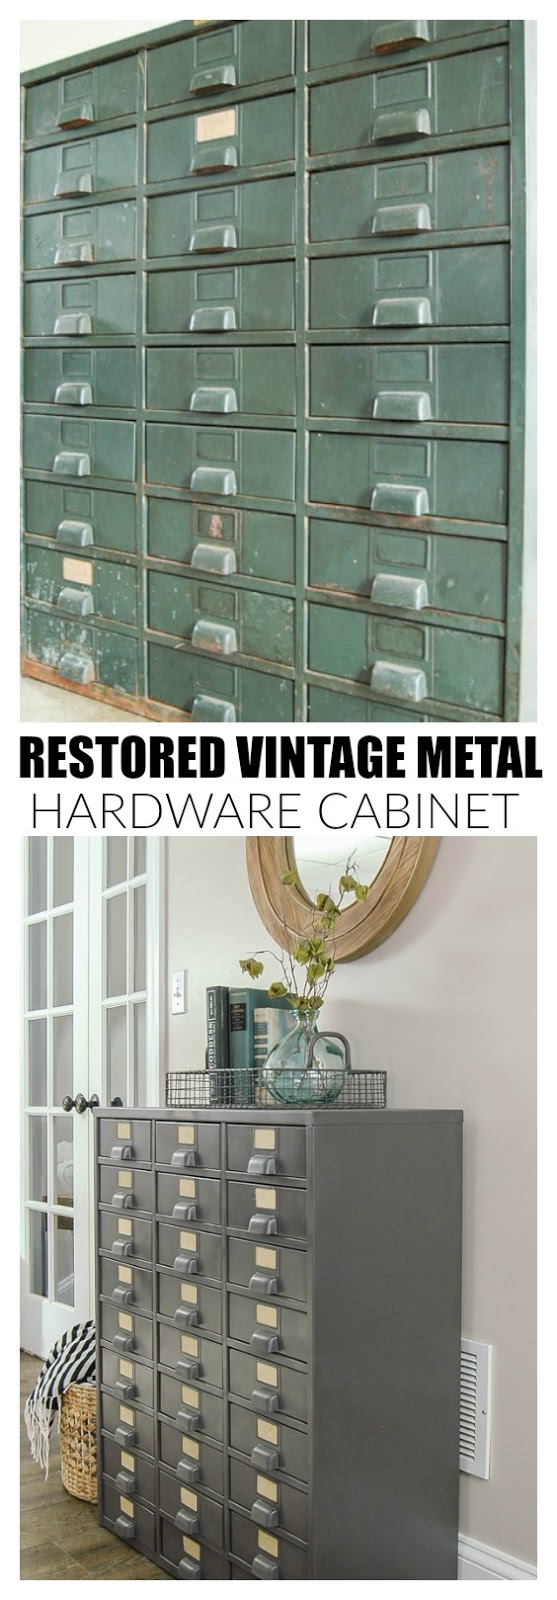 I LOVE this piece! A vintage metal hardware cabinet gets restored and turned into perfect home storage. www.littlehouseoffour.com